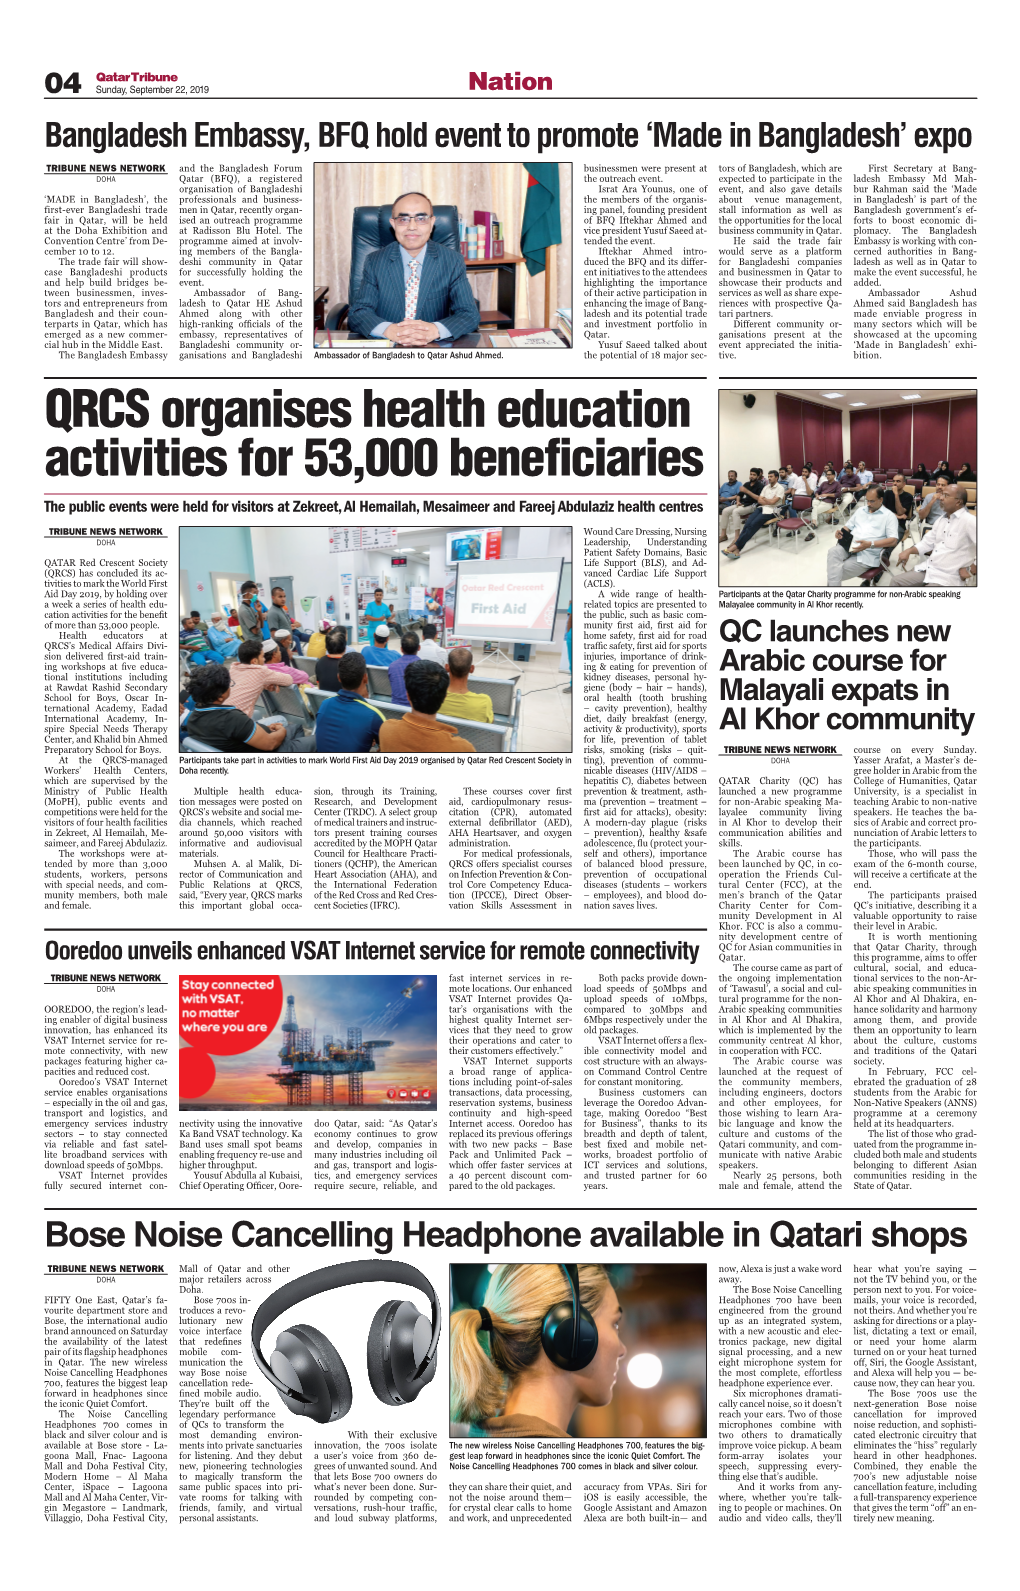 QRCS Organises Health Education Activities for 53,000 Beneficiaries